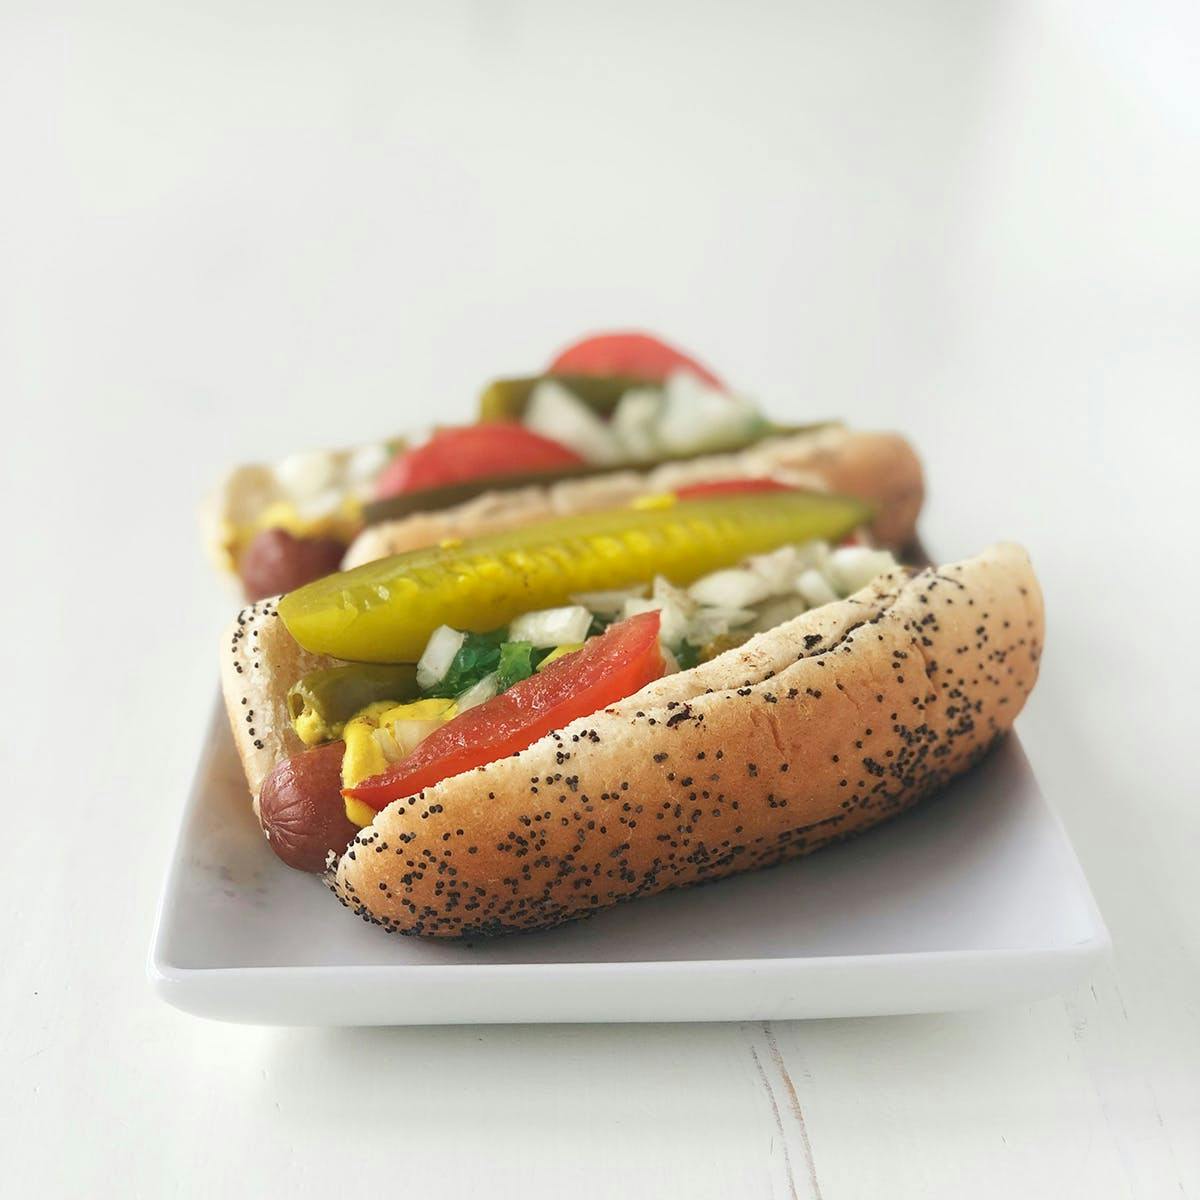 Natural Casing Chicago Style Hot Dog Kit 10 PACK Vienna Beef